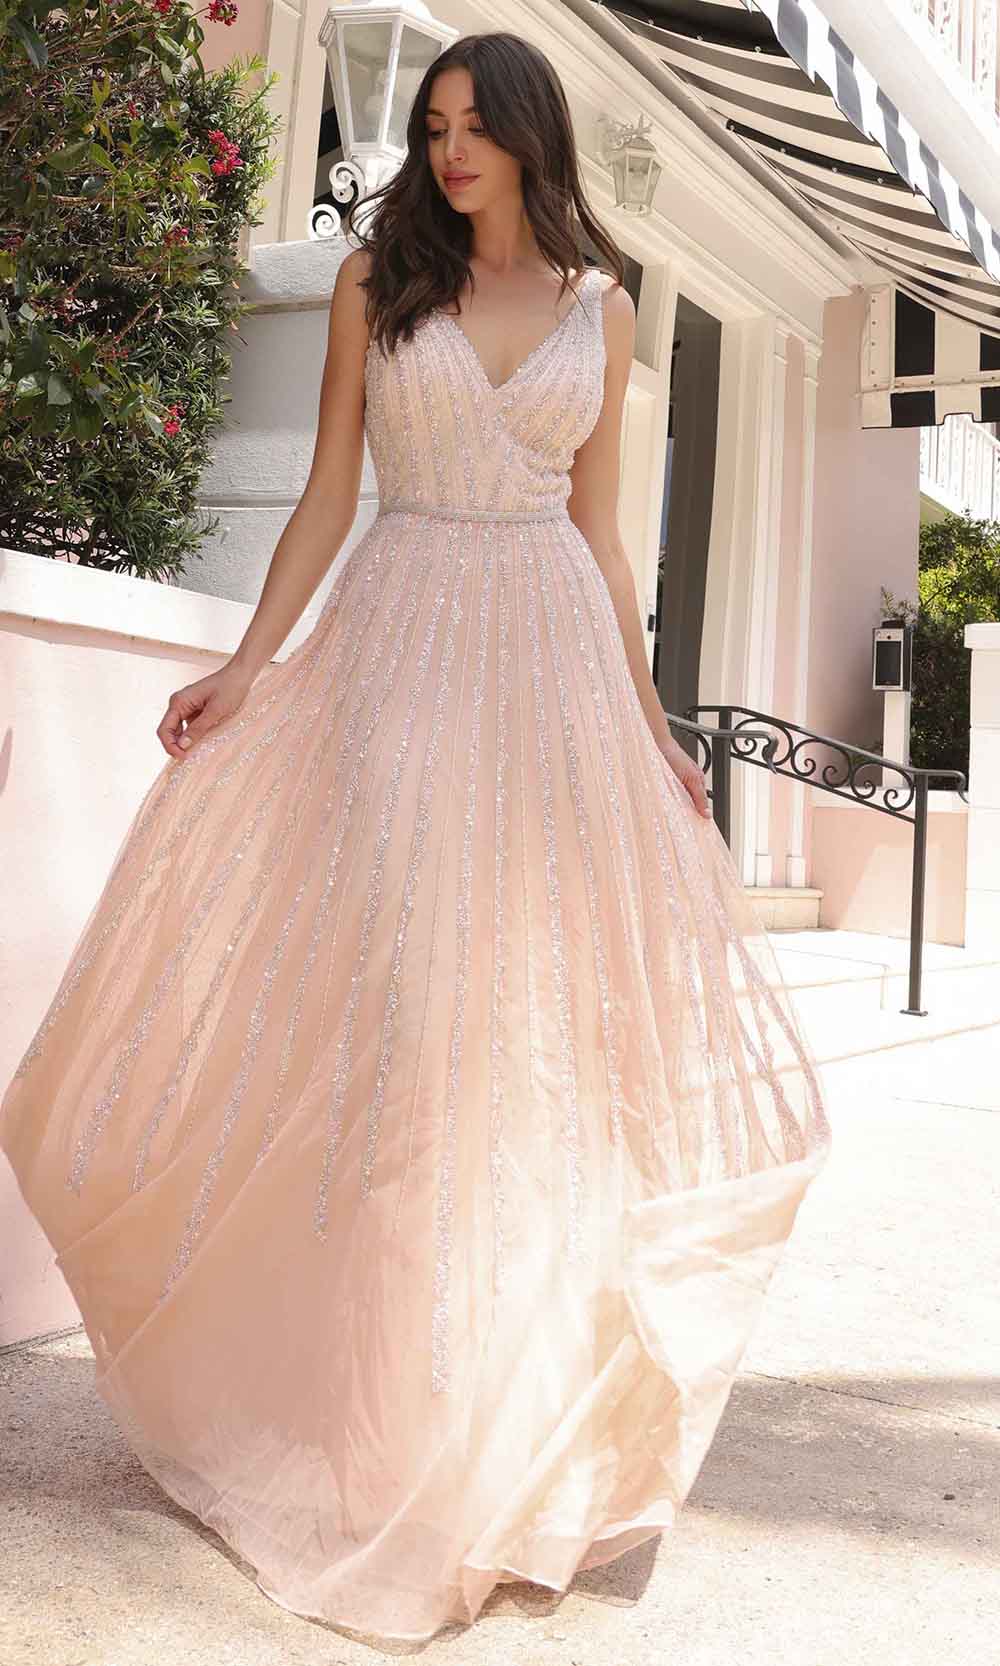 Primavera Couture 12116 - Beaded A-Line Prom Gown Special Occasion Dress